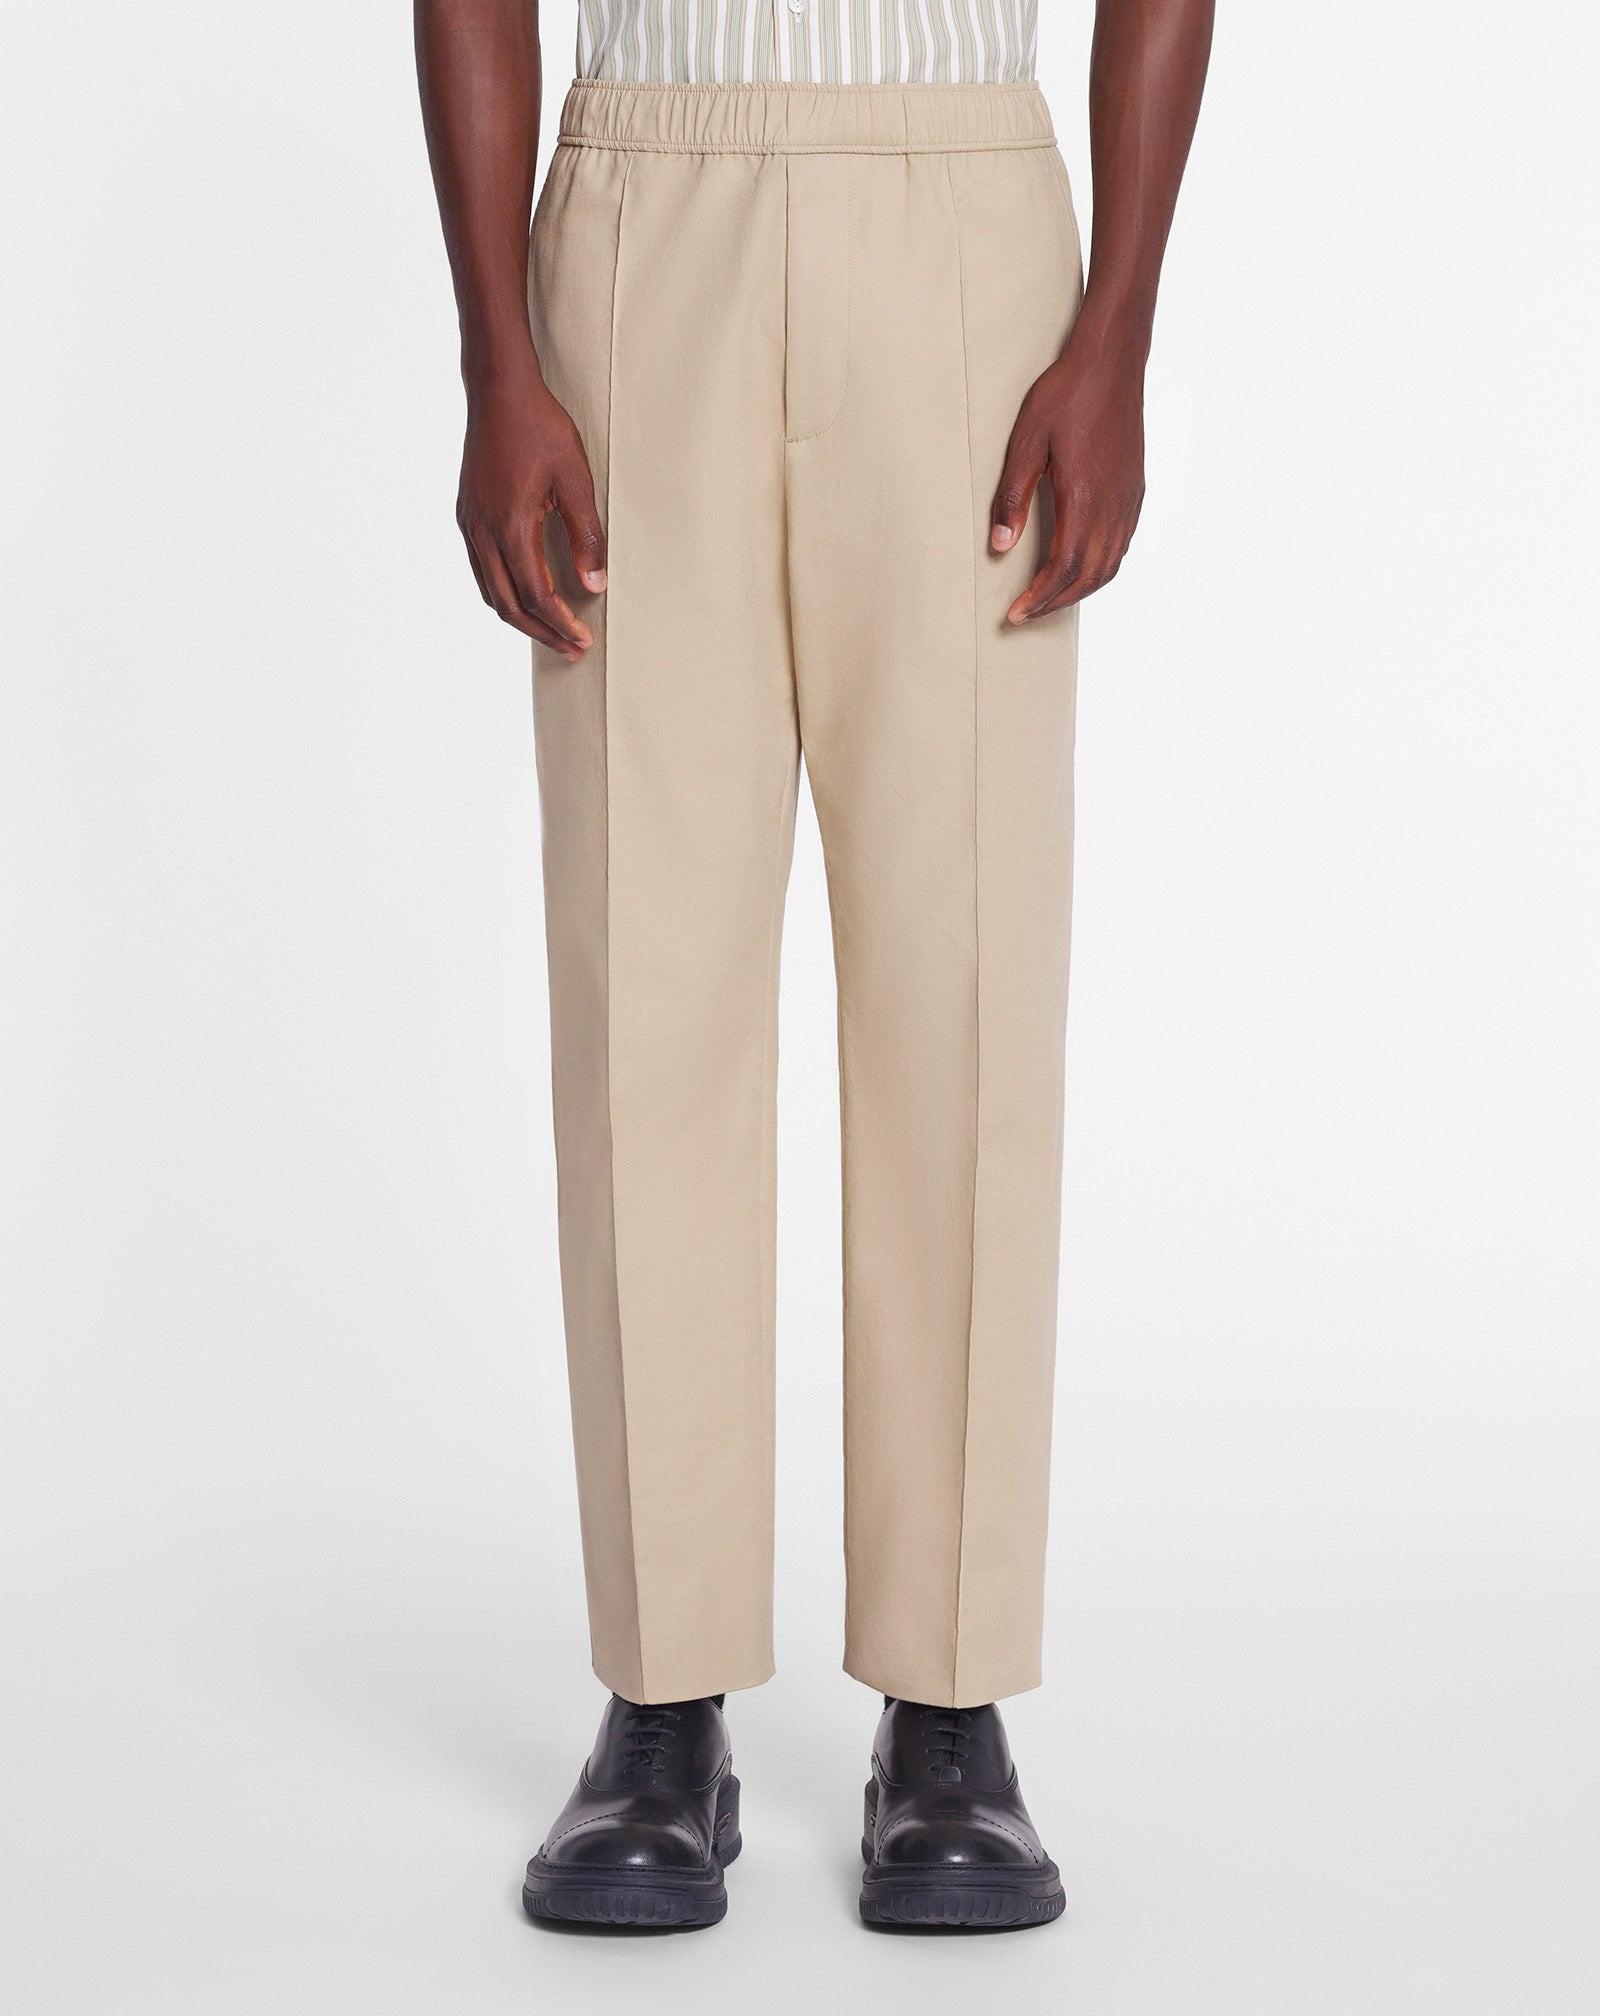 SUIT PANTS WITH AN ELASTICATED WAISTBAND - 3